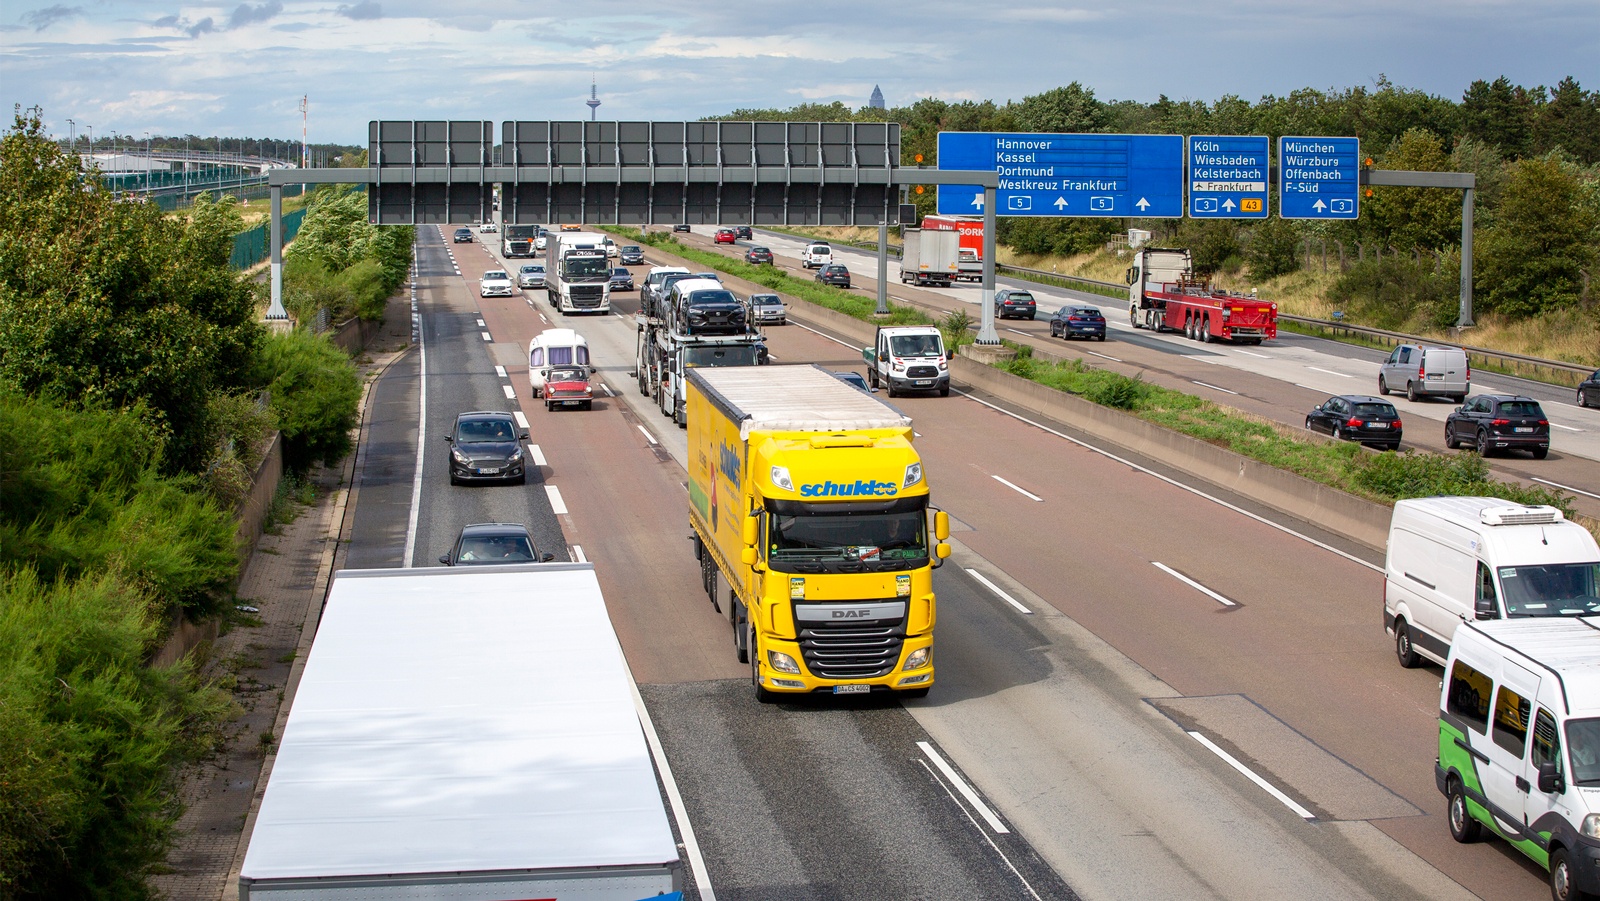 Plan to expand one of Germany’s busiest autobahns sparks backlash from campaigners